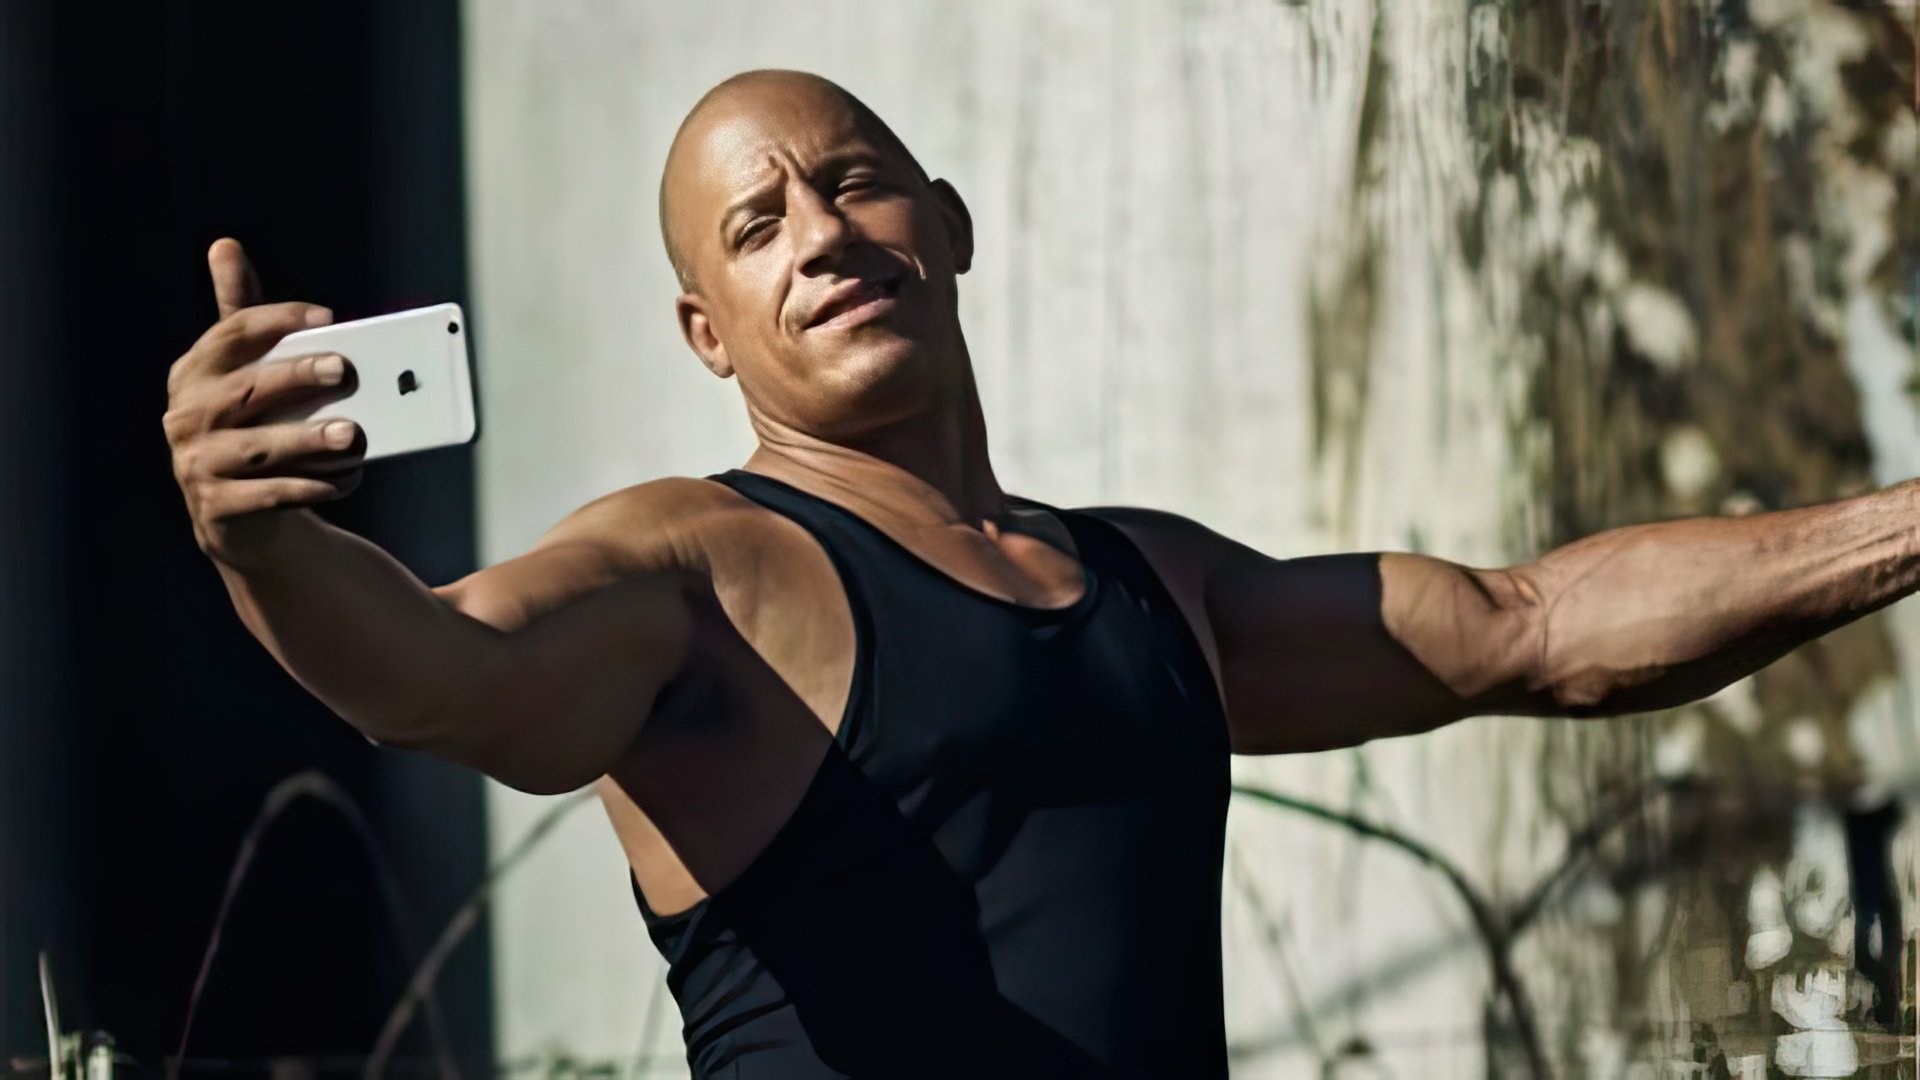 Vin Diesel is the star of the Hollywood blockbuster